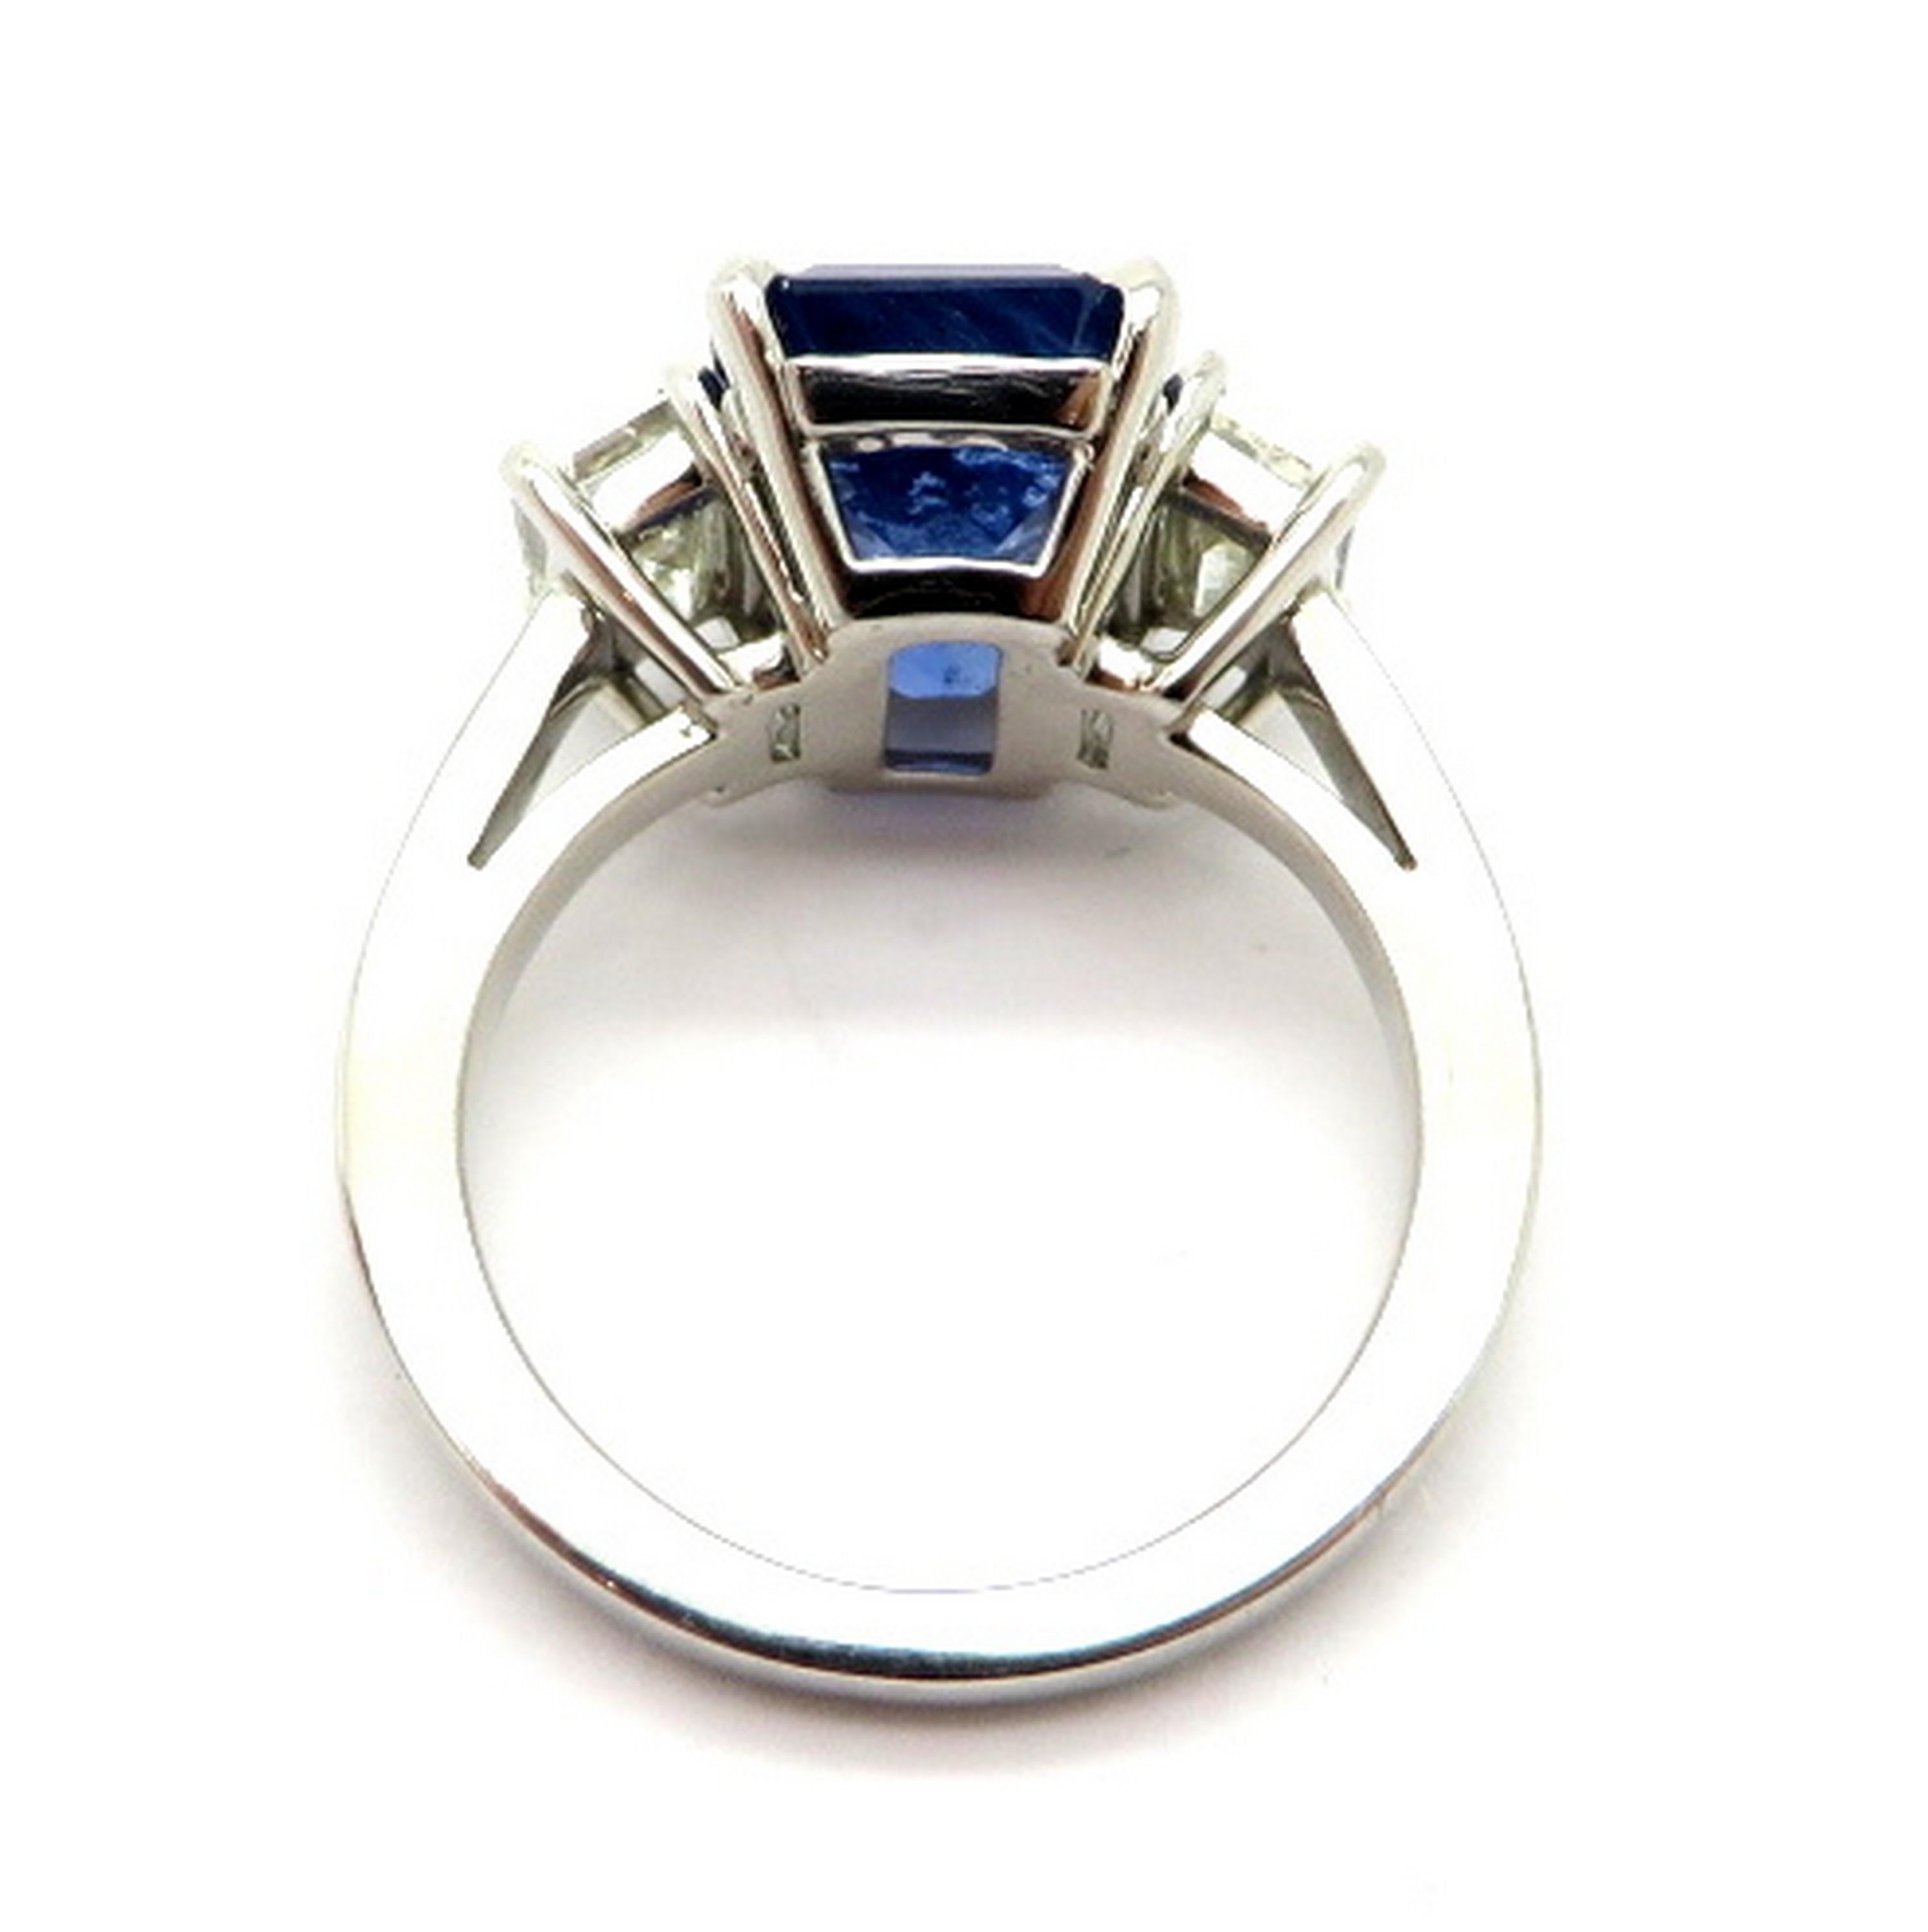 3.65ct Emerald Cut Sapphire Ring In Excellent Condition For Sale In Scottsdale, AZ